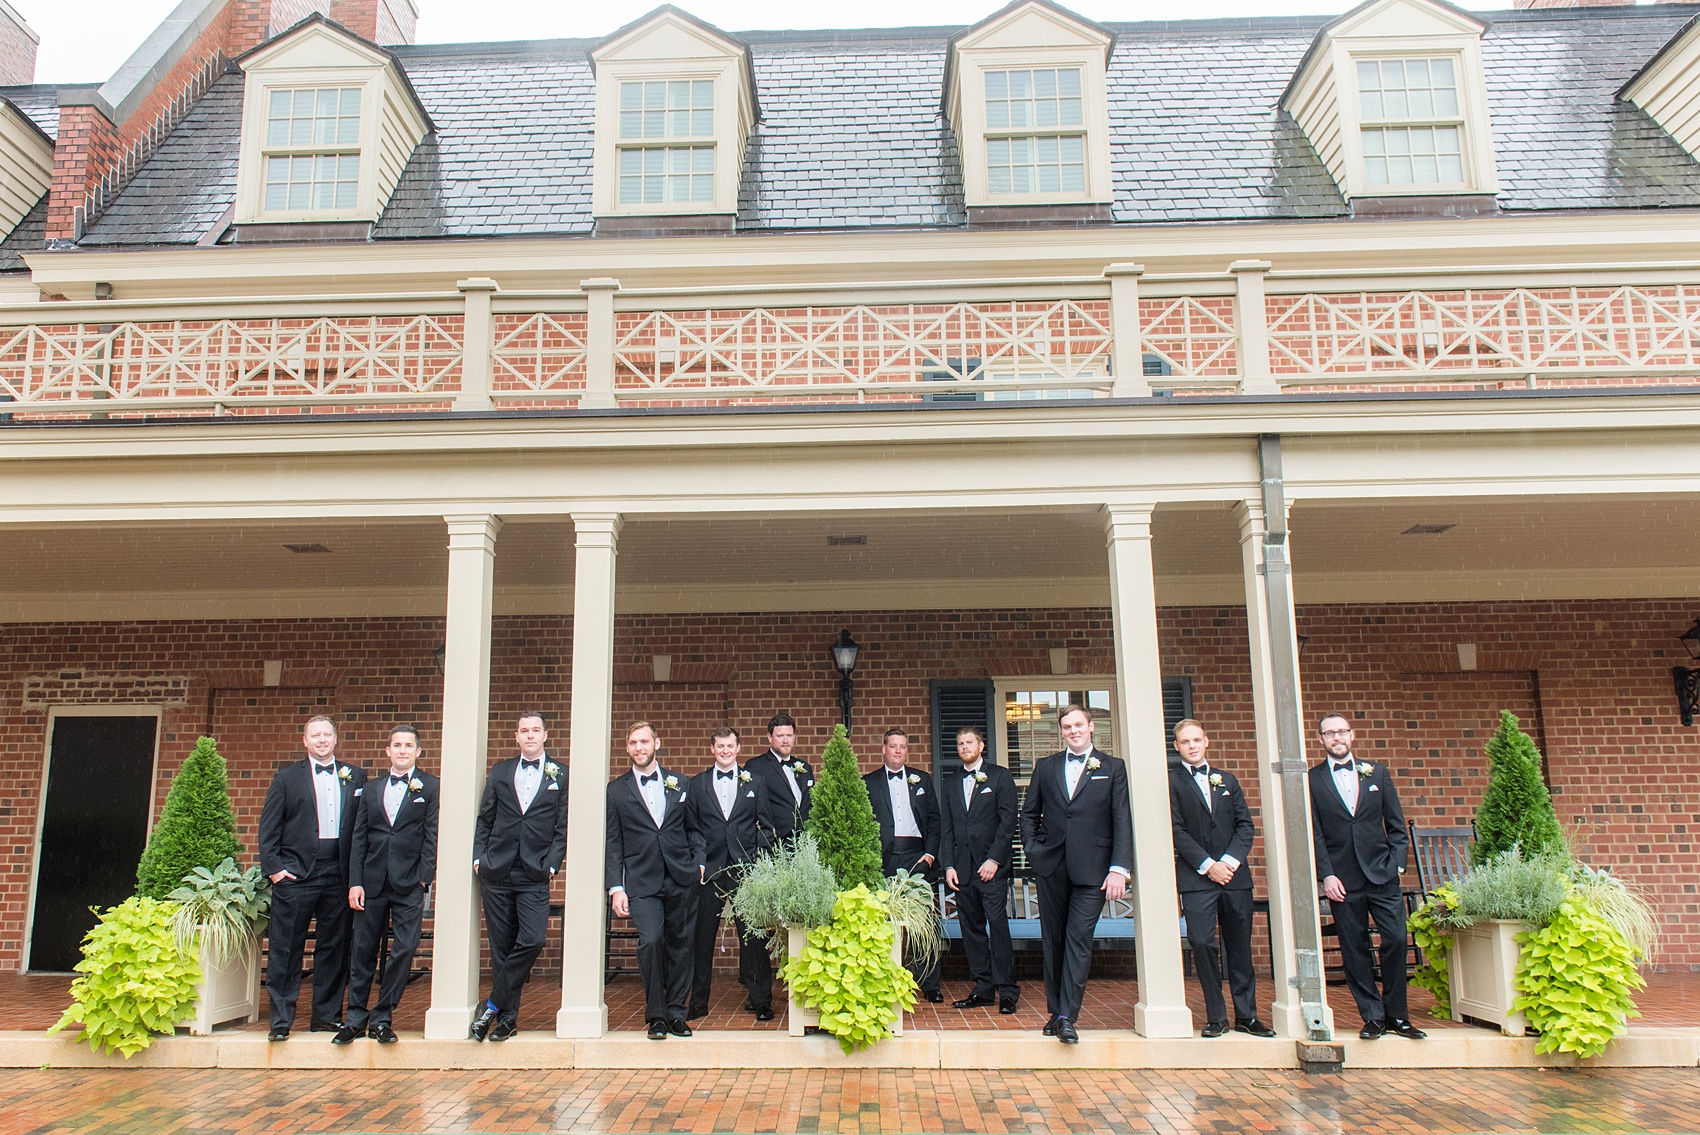 Photos of a fall wedding at The Carolina Inn, in Chapel Hill North Carolina, by Mikkel Paige Photography. This event venue doubles as a hotel for guests, who can enjoy a reception indoors or outdoors. The groomsmen wore classic black tuxedos with white rose boutonnieres by The Flower Cupboard. Click through to see inspiration from the entire wedding! Planner: @asouthernsoiree #thecarolinainn #ChapelHillWeddings #MikkelPaige #ASouthernSoiree #greenwedding #groomsmen #blacktuxedos